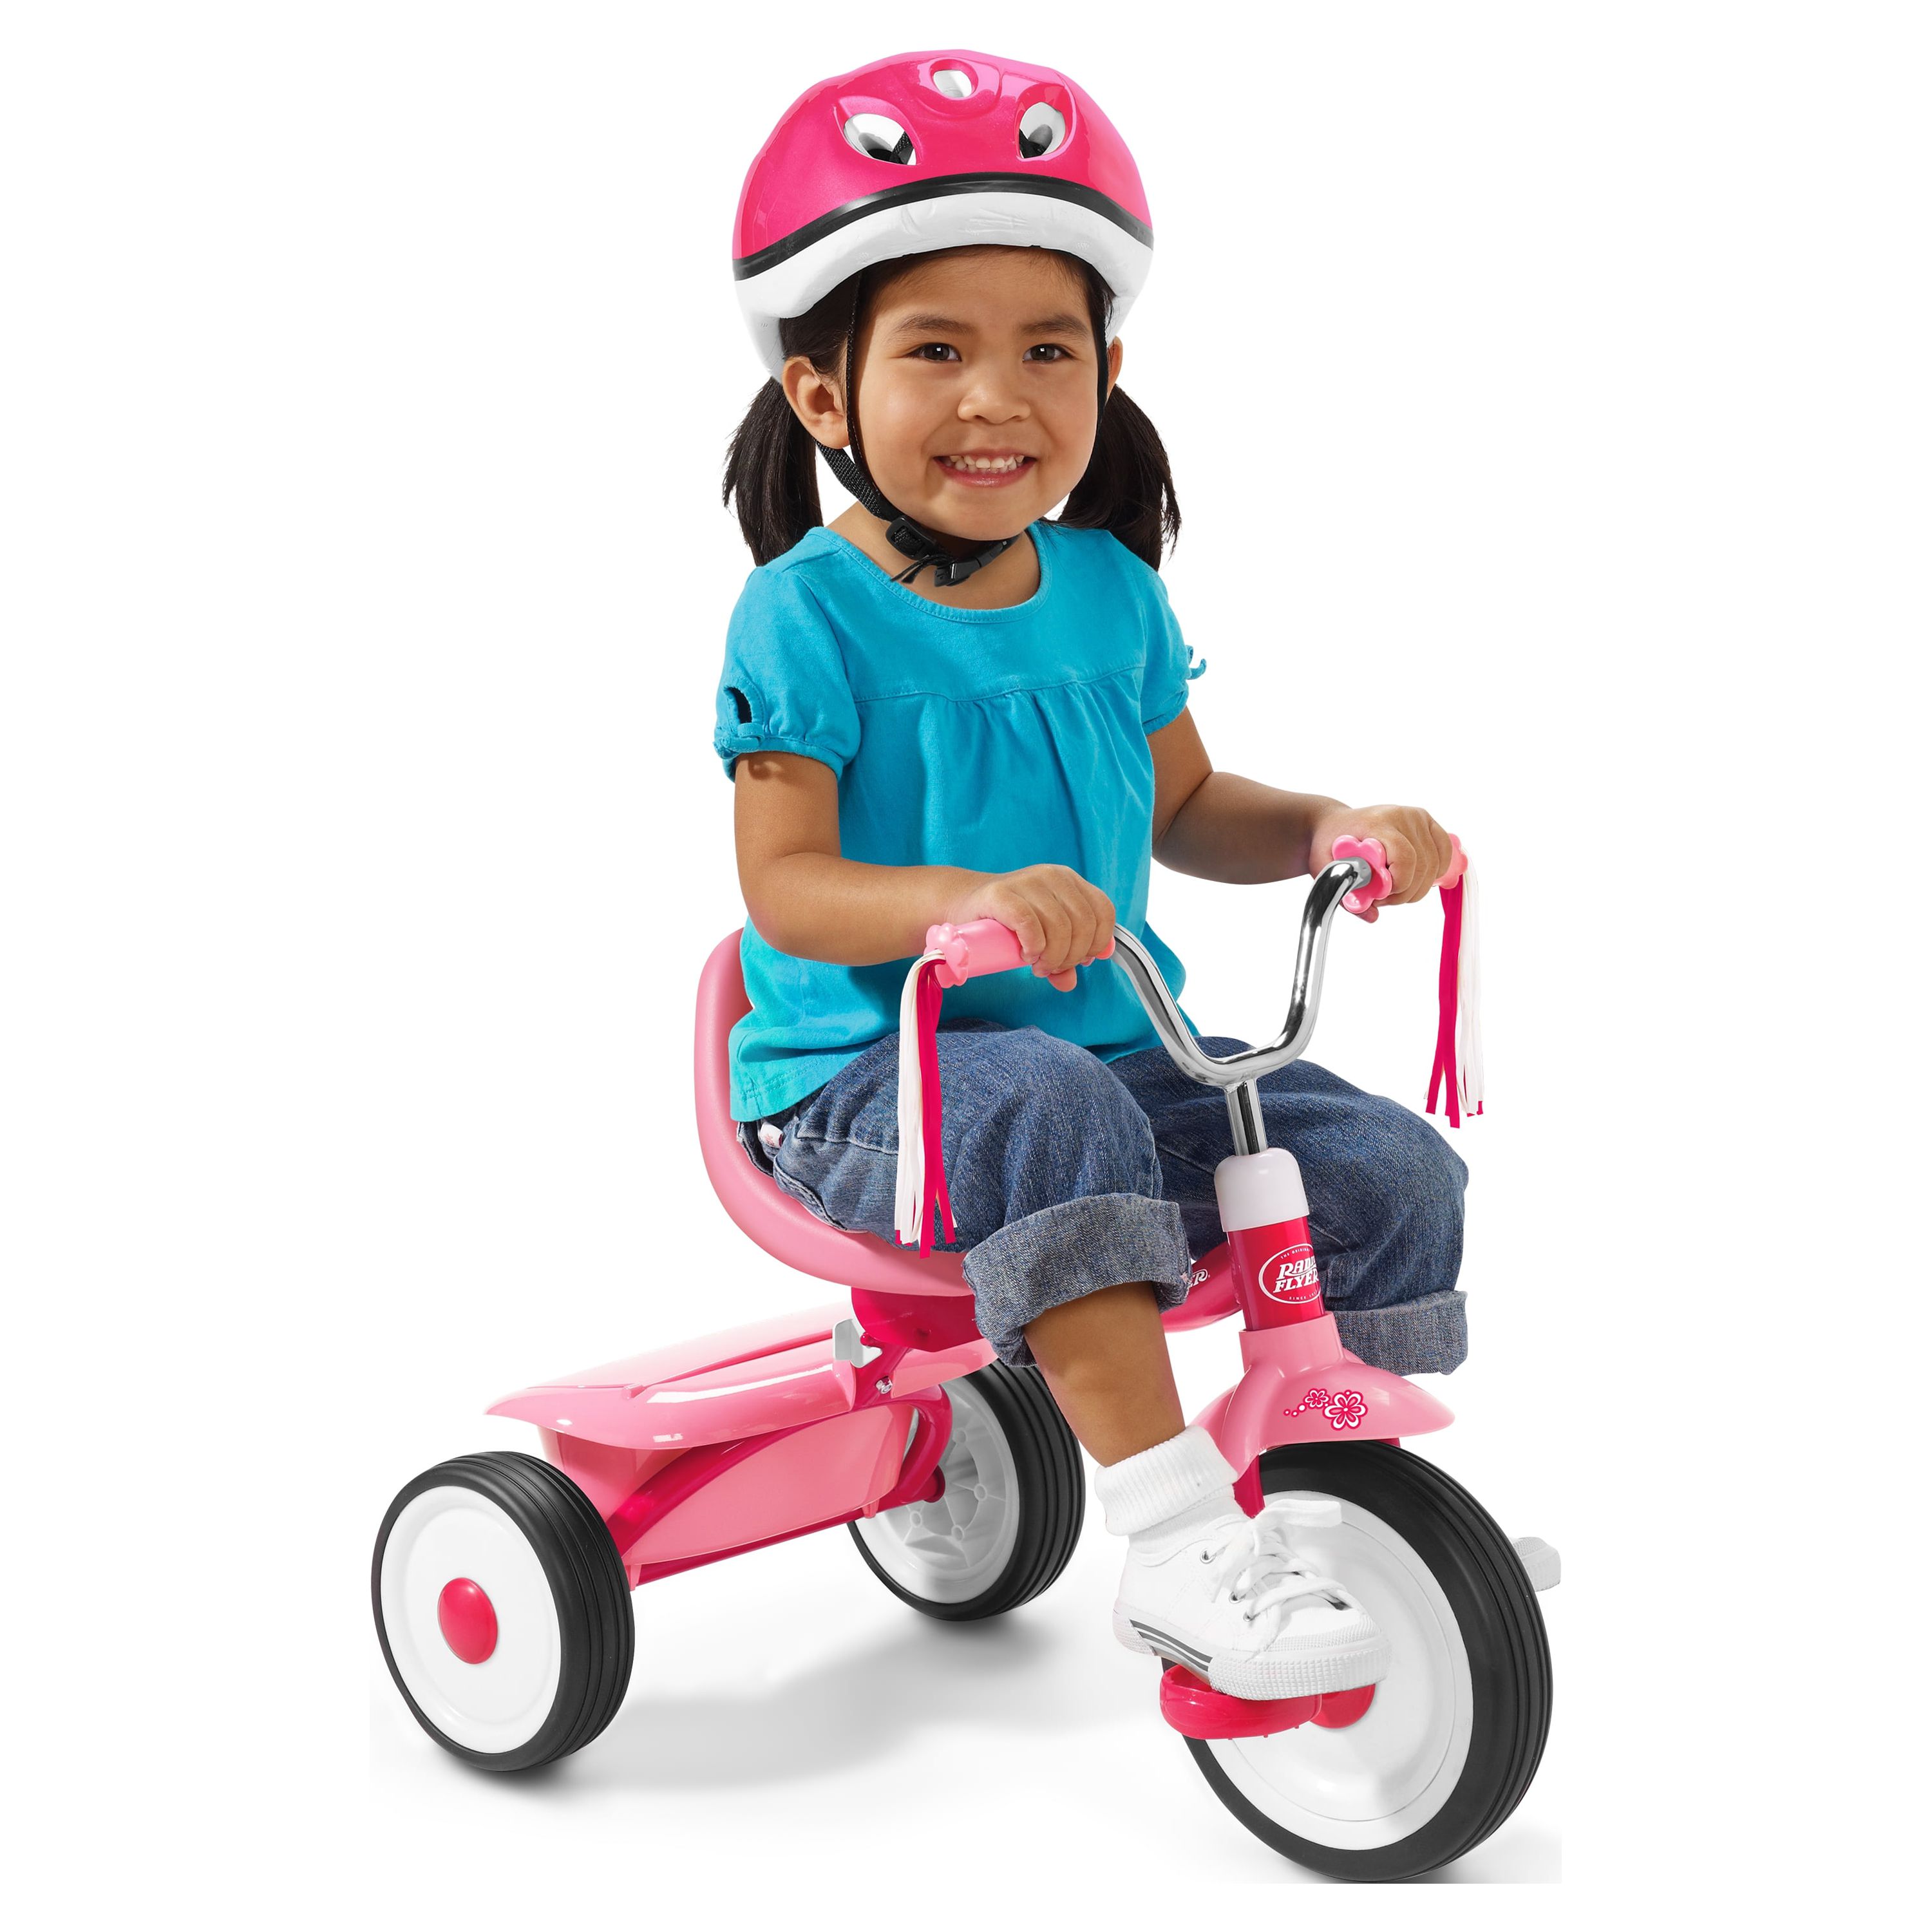 Radio Flyer, Ready to Ride Folding Trike, Fully Assembled, Pink, Beginner Tricycle for Kids, Girls - image 1 of 10